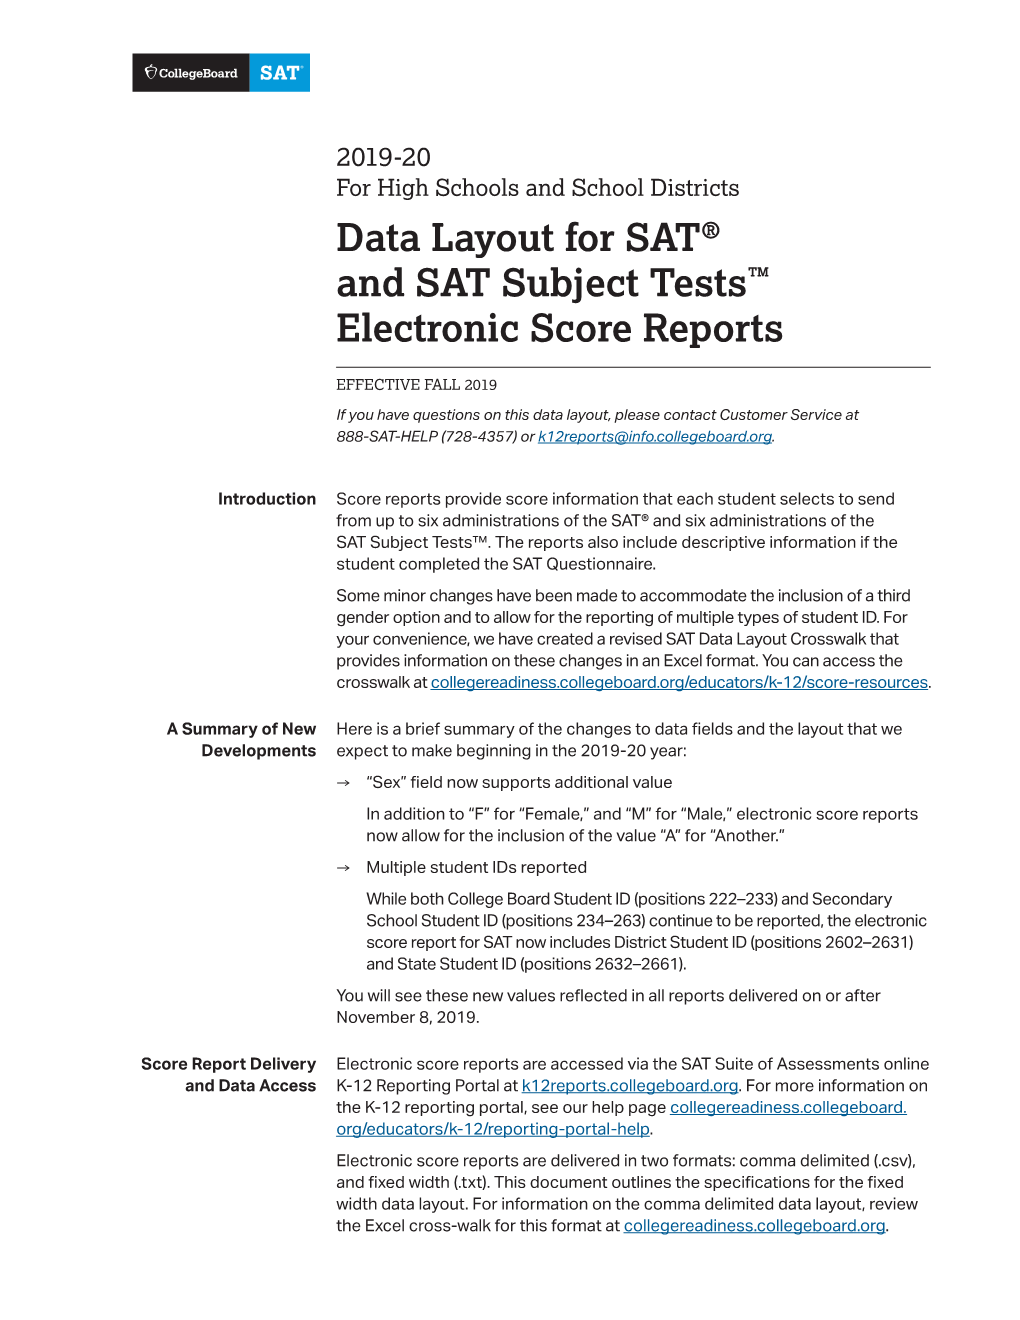 Data Layout for SAT® and SAT Subject Tests™ Electronic Score Reports